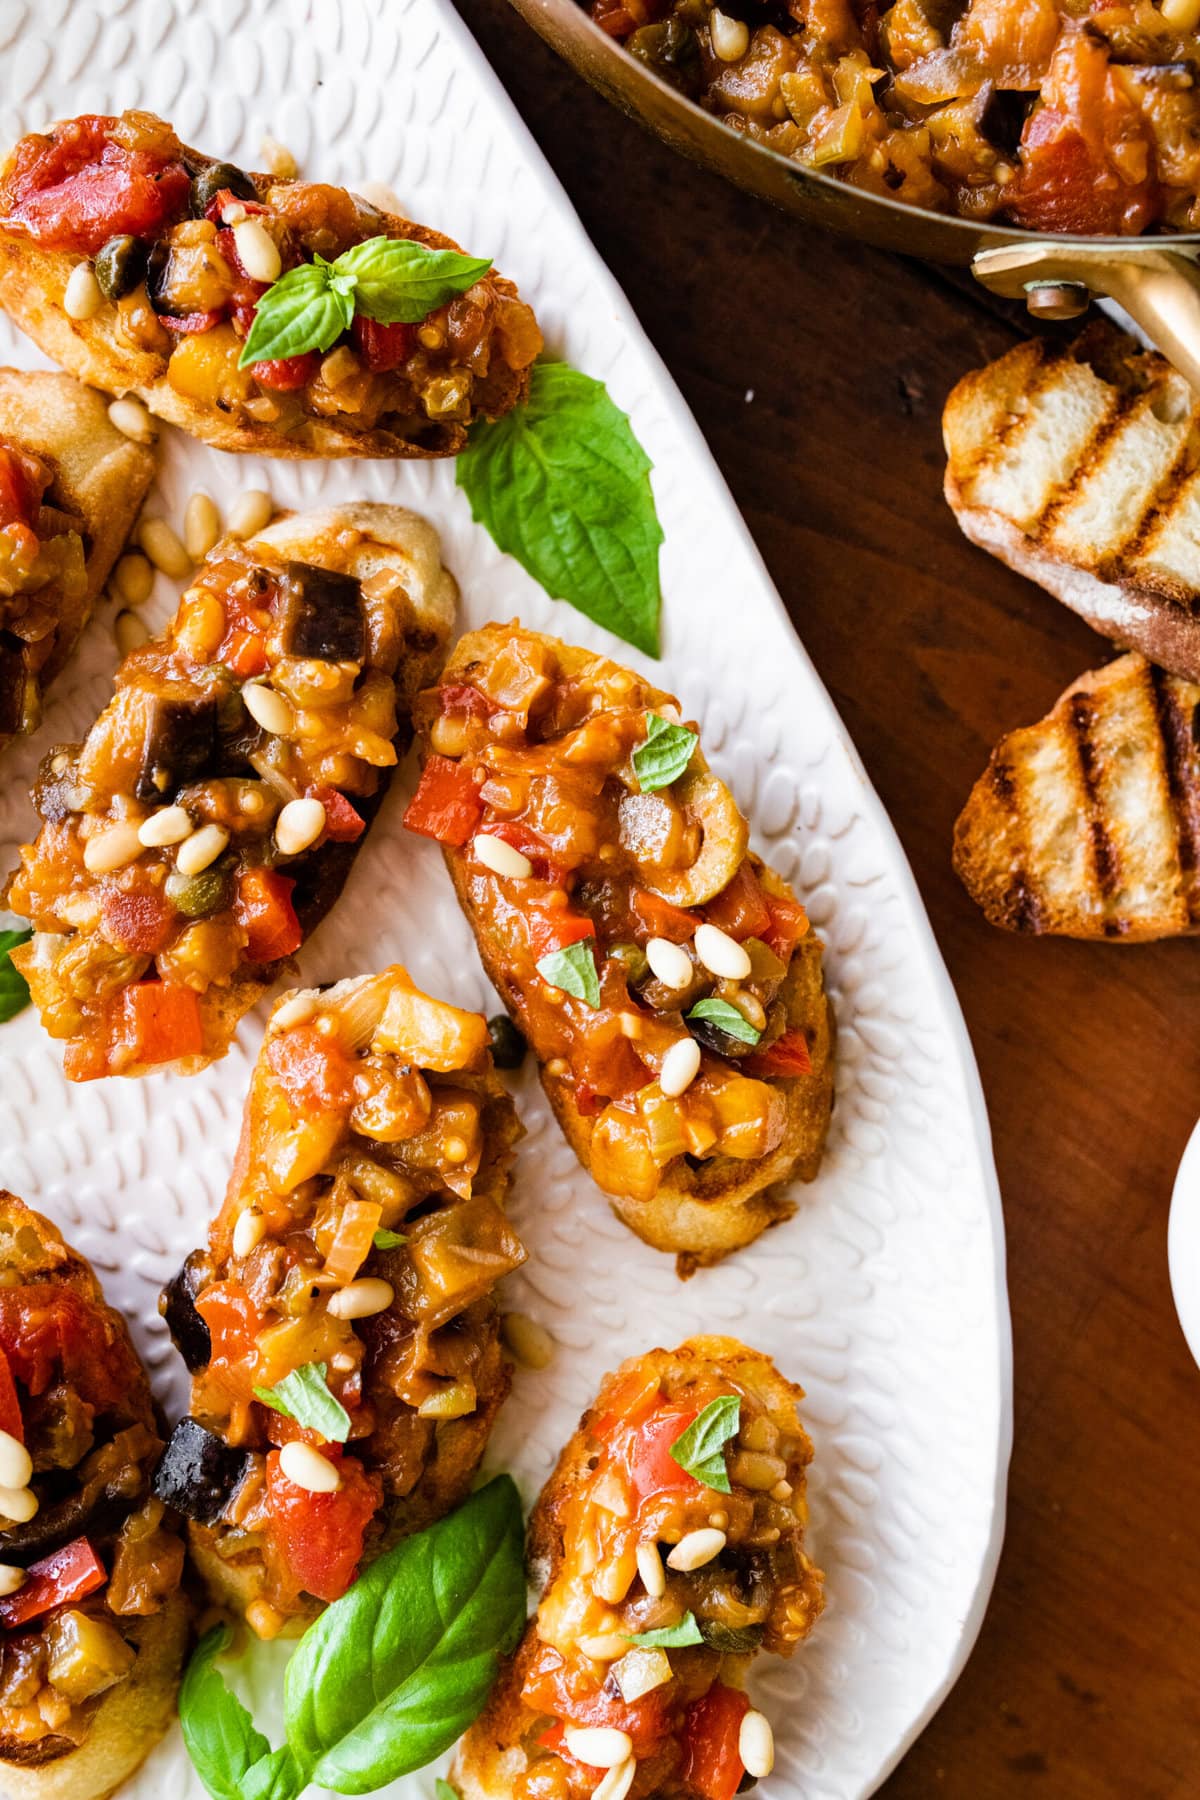 caponata recipe on grilled bread or crostini. on a platter with basil leaves and pine nuts as decoration.